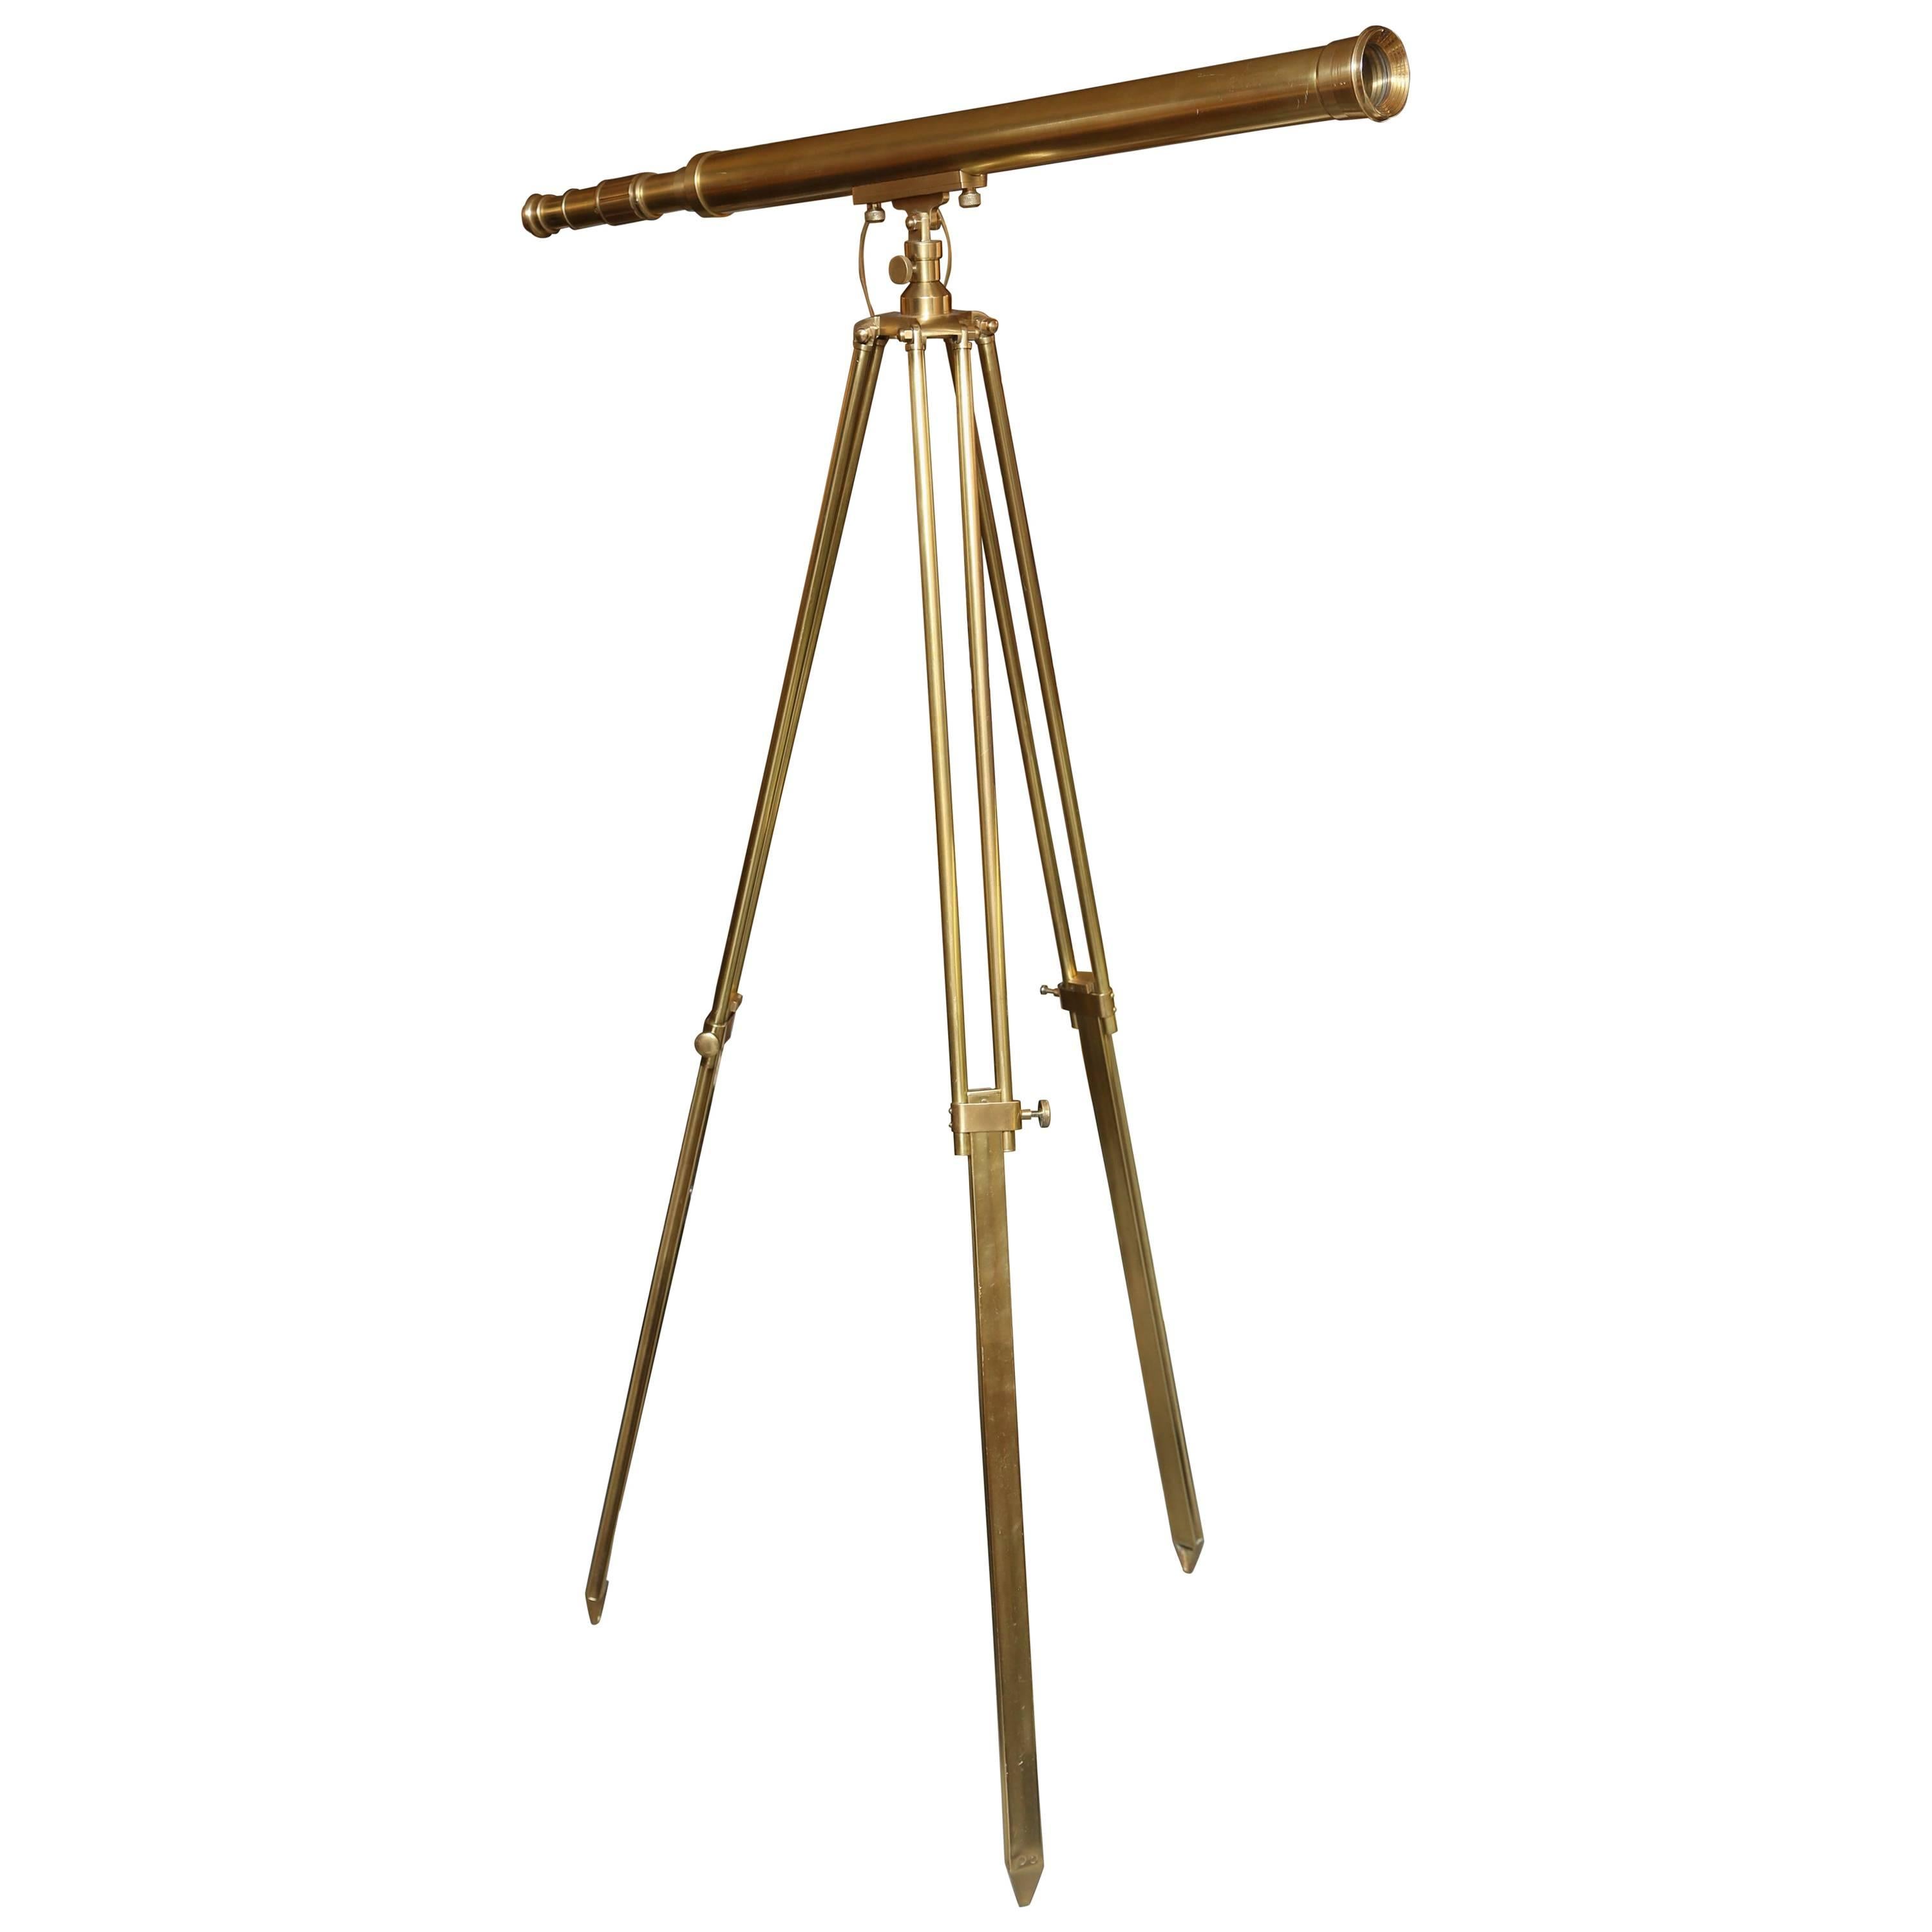 Brass Telescope with Stand Signed Ross, London